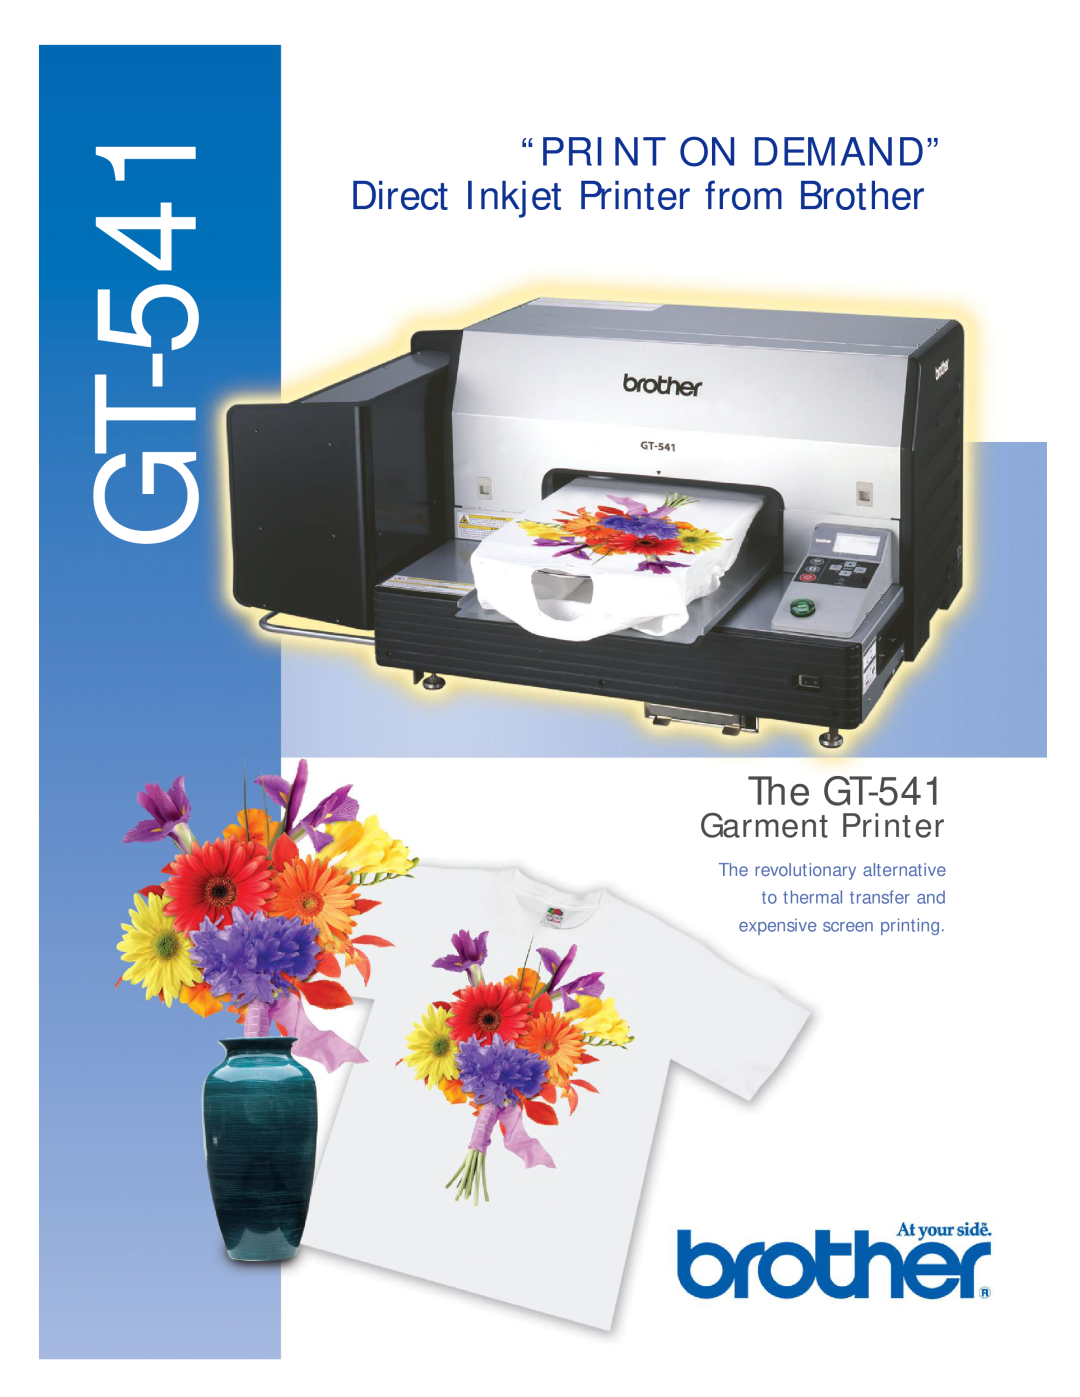 Brother manual “Print On Demand”, Direct Inkjet Printer from Brother, The GT-541, Garment Printer 